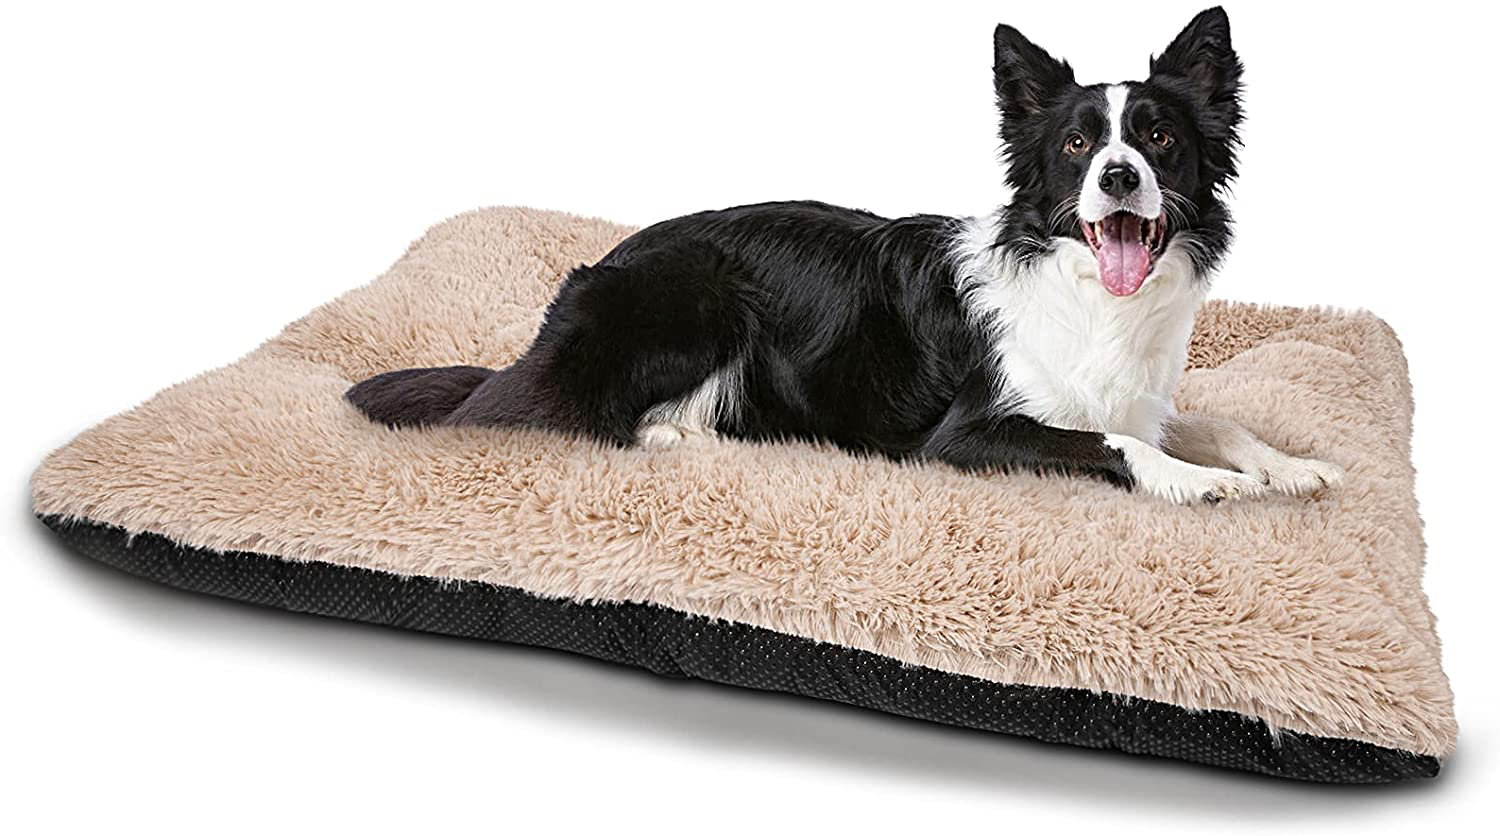 JOEJOY Dog Bed Crate Pad, Ultra Soft Calming Washable Anti-Slip Mattress Kennel Crate Bed Pad Mat 24/30/36/42 Inch for Large Extra Large Medium Small Dogs and Cats Sleeping, Anti-Slip Dog Cushion